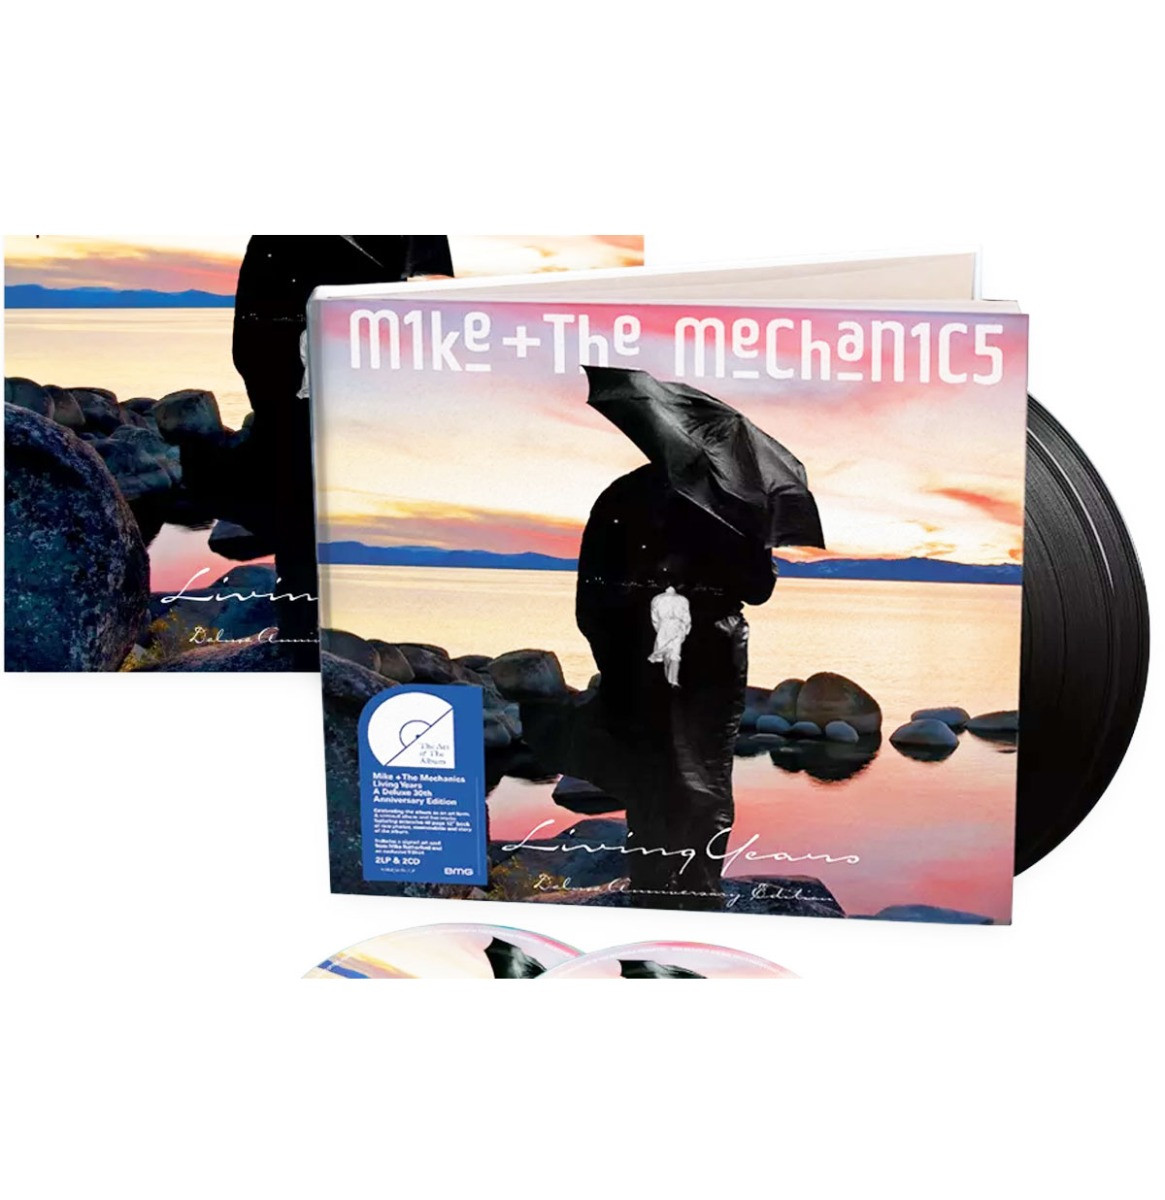 Mike + The Mechanics - Living Years Deluxe Anniversary Edition - 2 LP + 2 CD